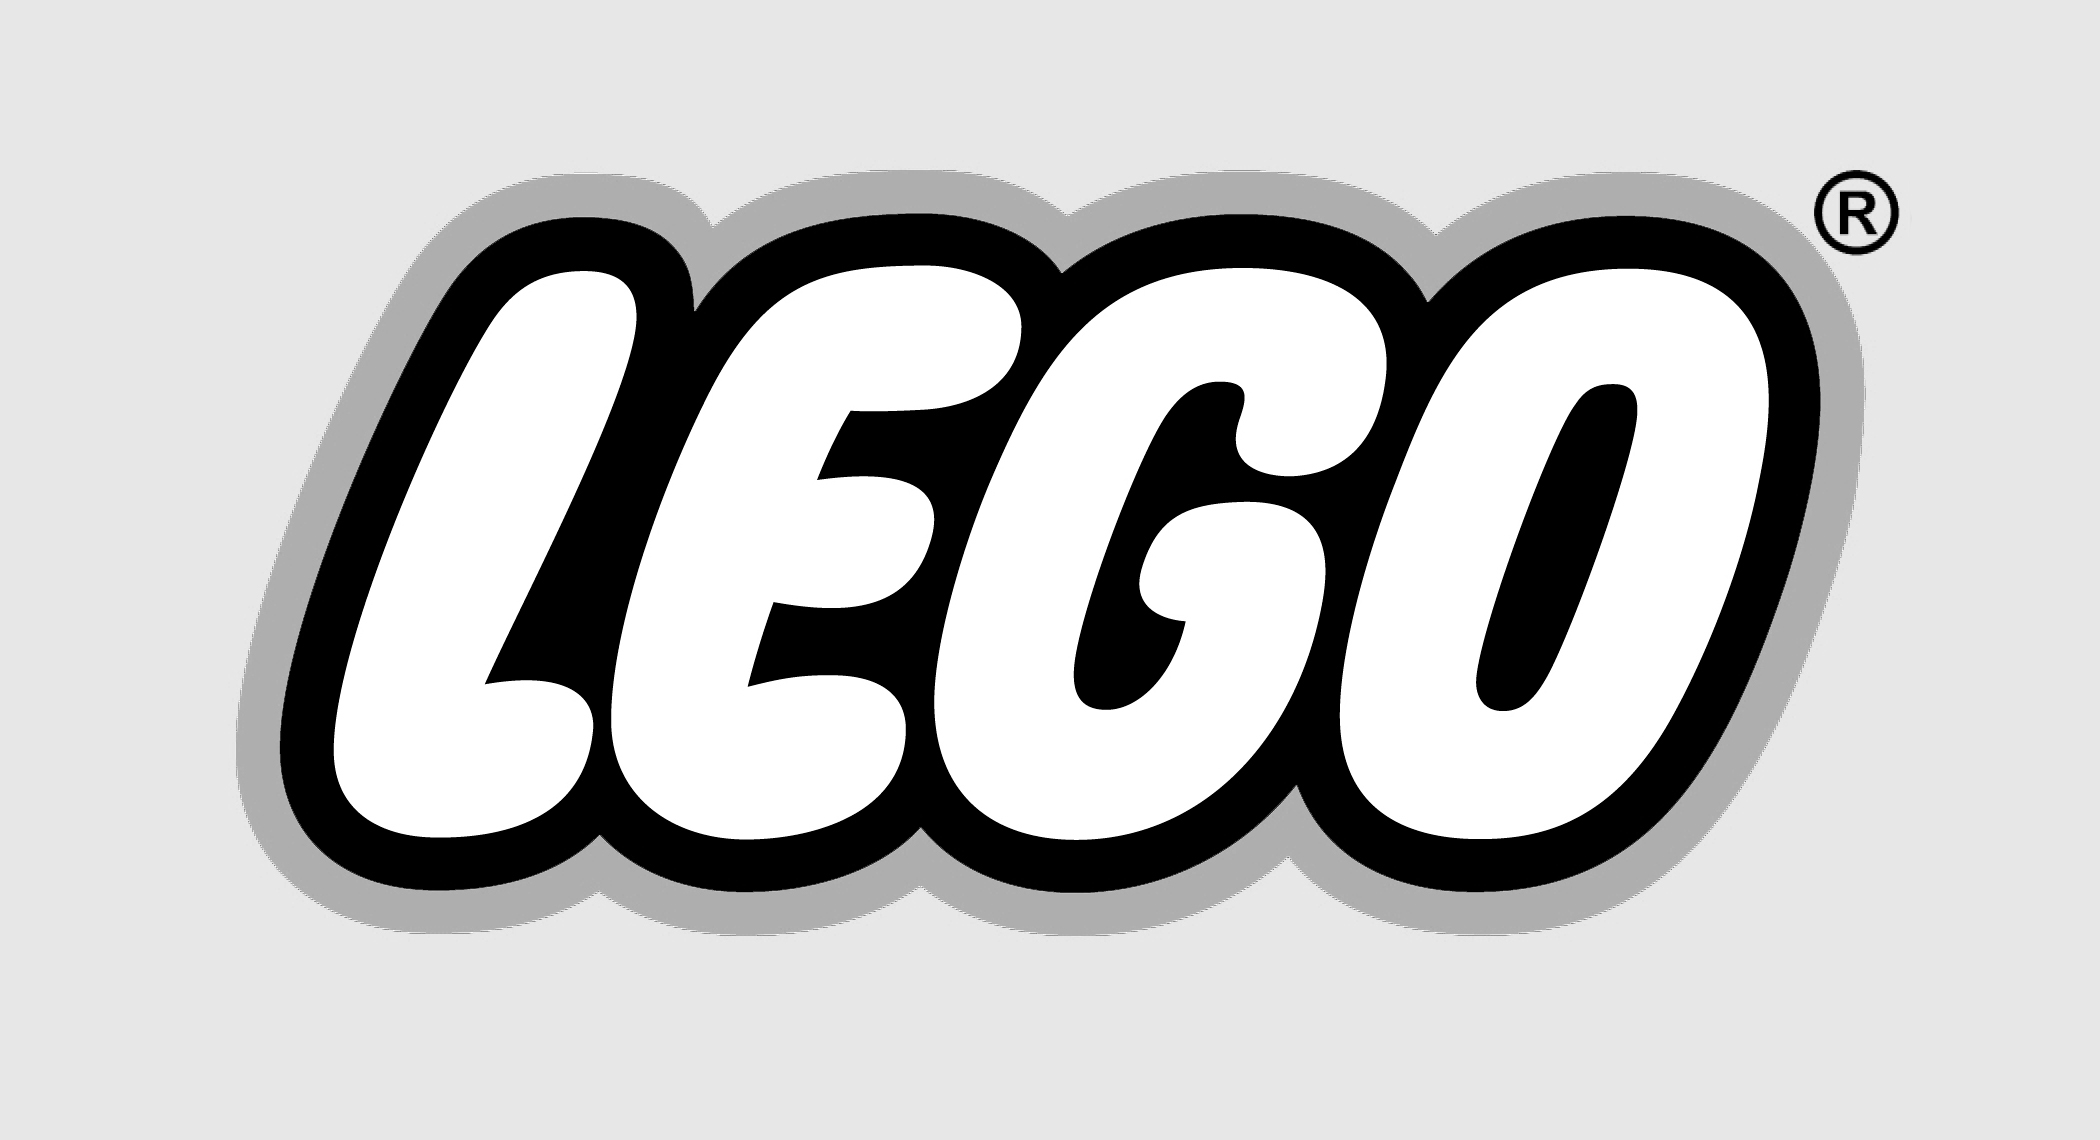 Meaning Lego logo and symbol | history and evolution2100 x 1140